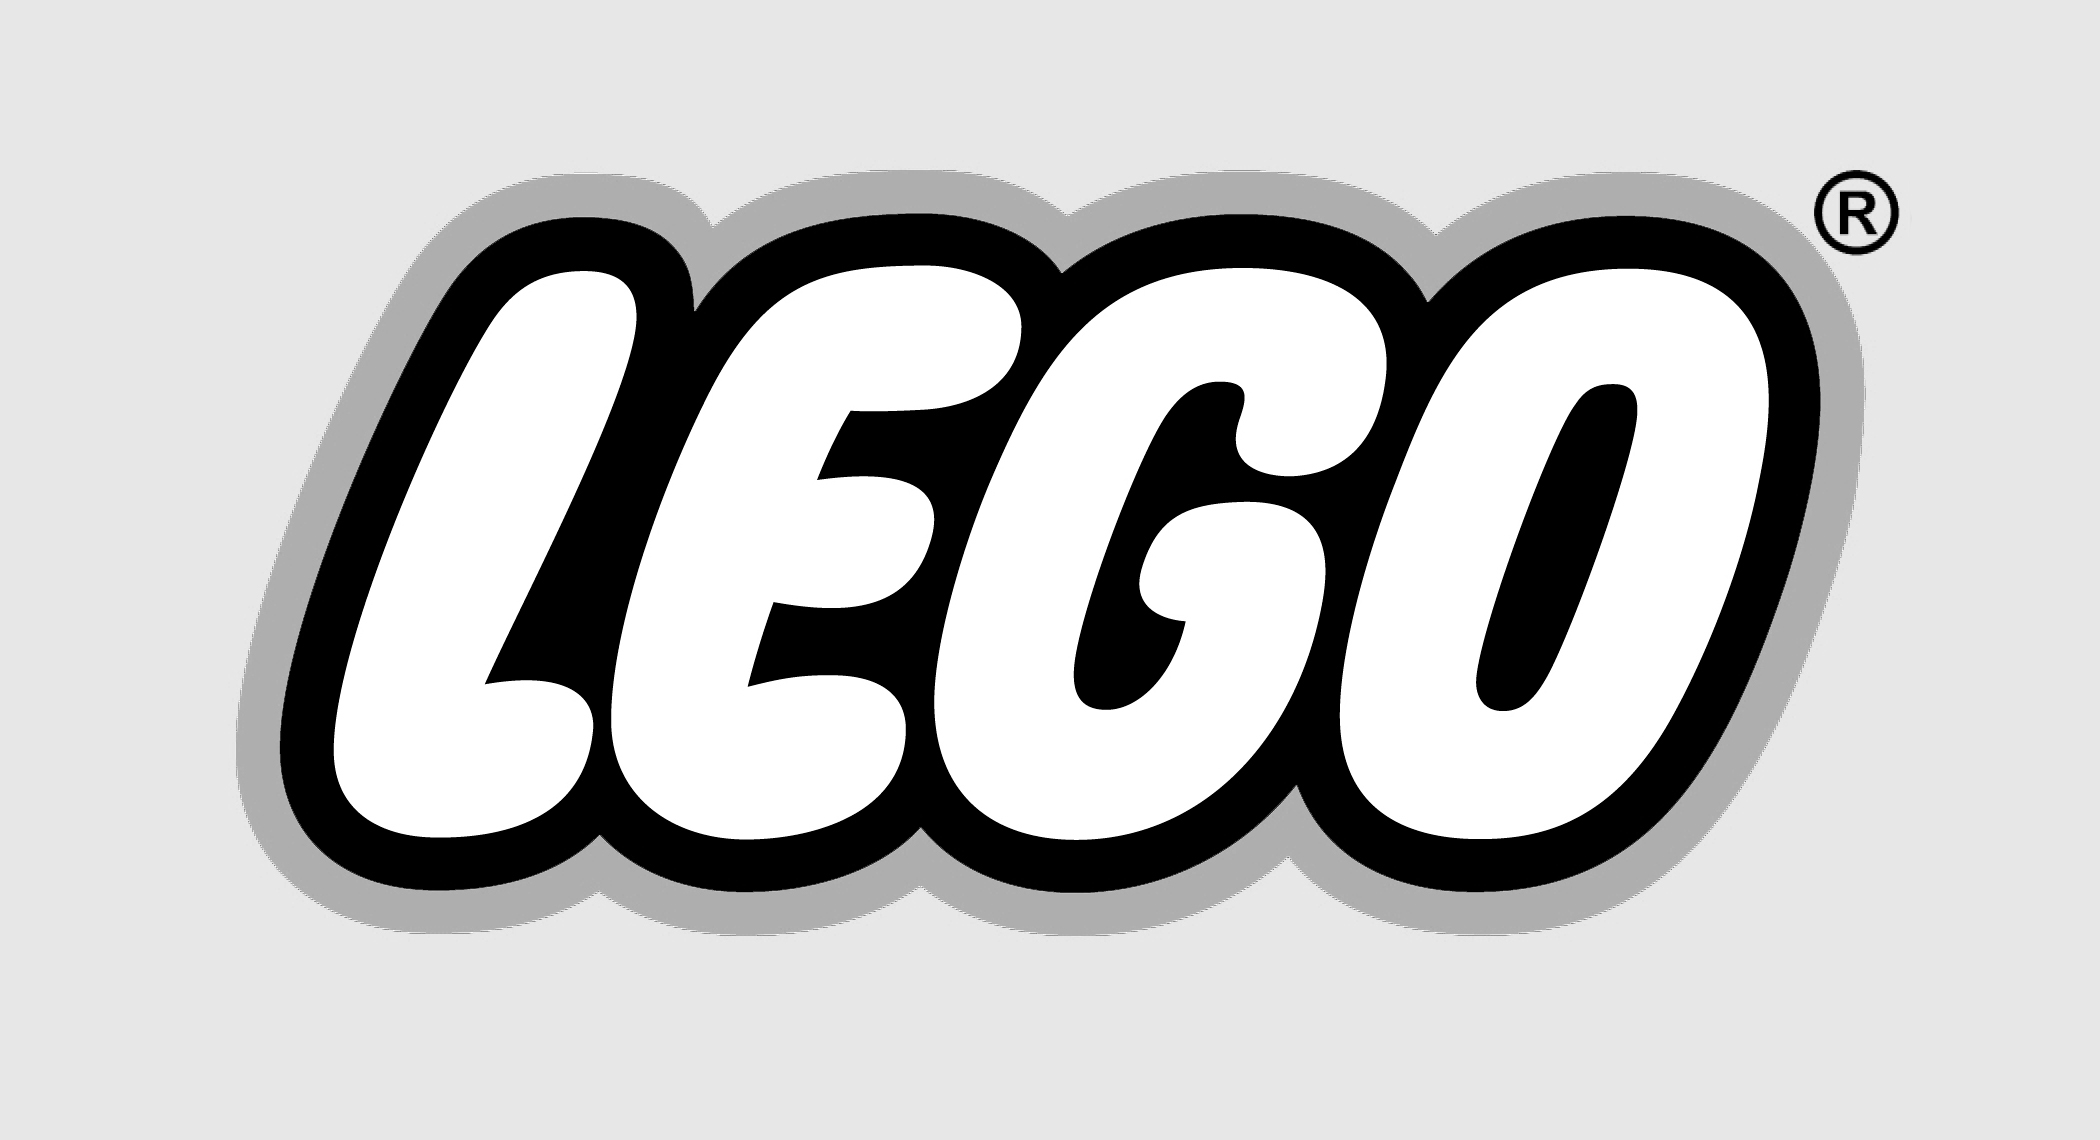 Meaning Lego logo and symbol | history and evolution2100 x 1140